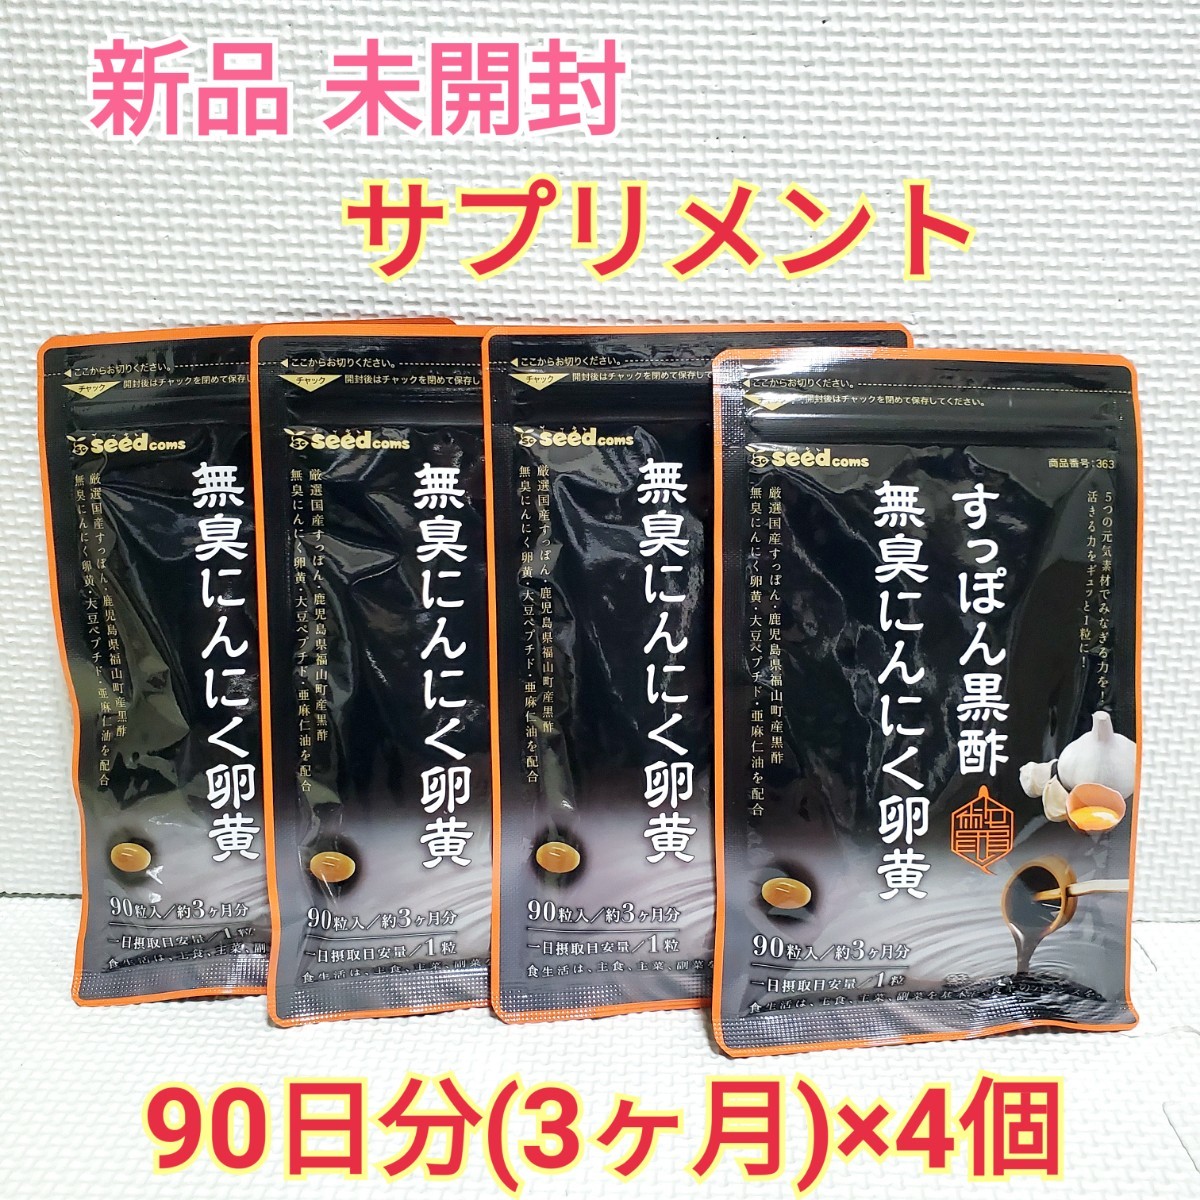  free shipping softshell turtle black vinegar less smell garlic egg yolk large legume pe small dosi-do Coms 12 months minute supplement diet support aging care support 